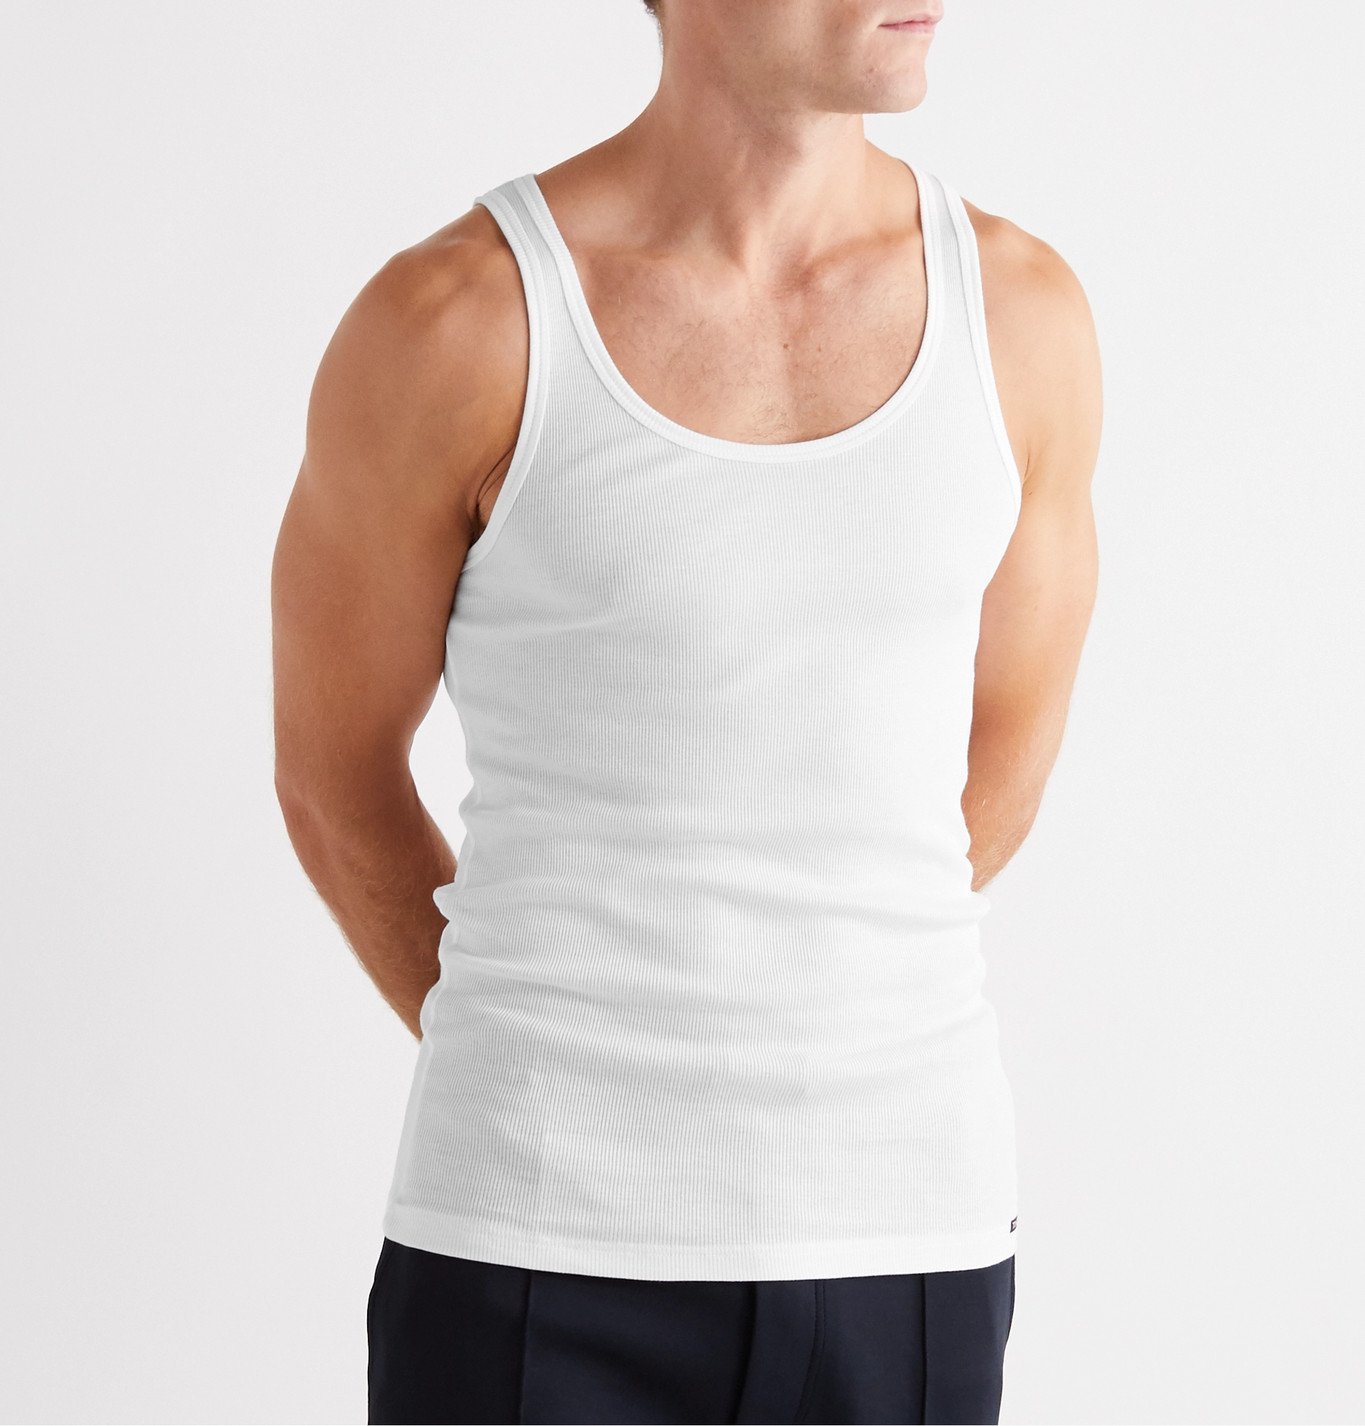 TOM FORD - Ribbed Cotton and Modal-Blend Tank Top - White TOM FORD